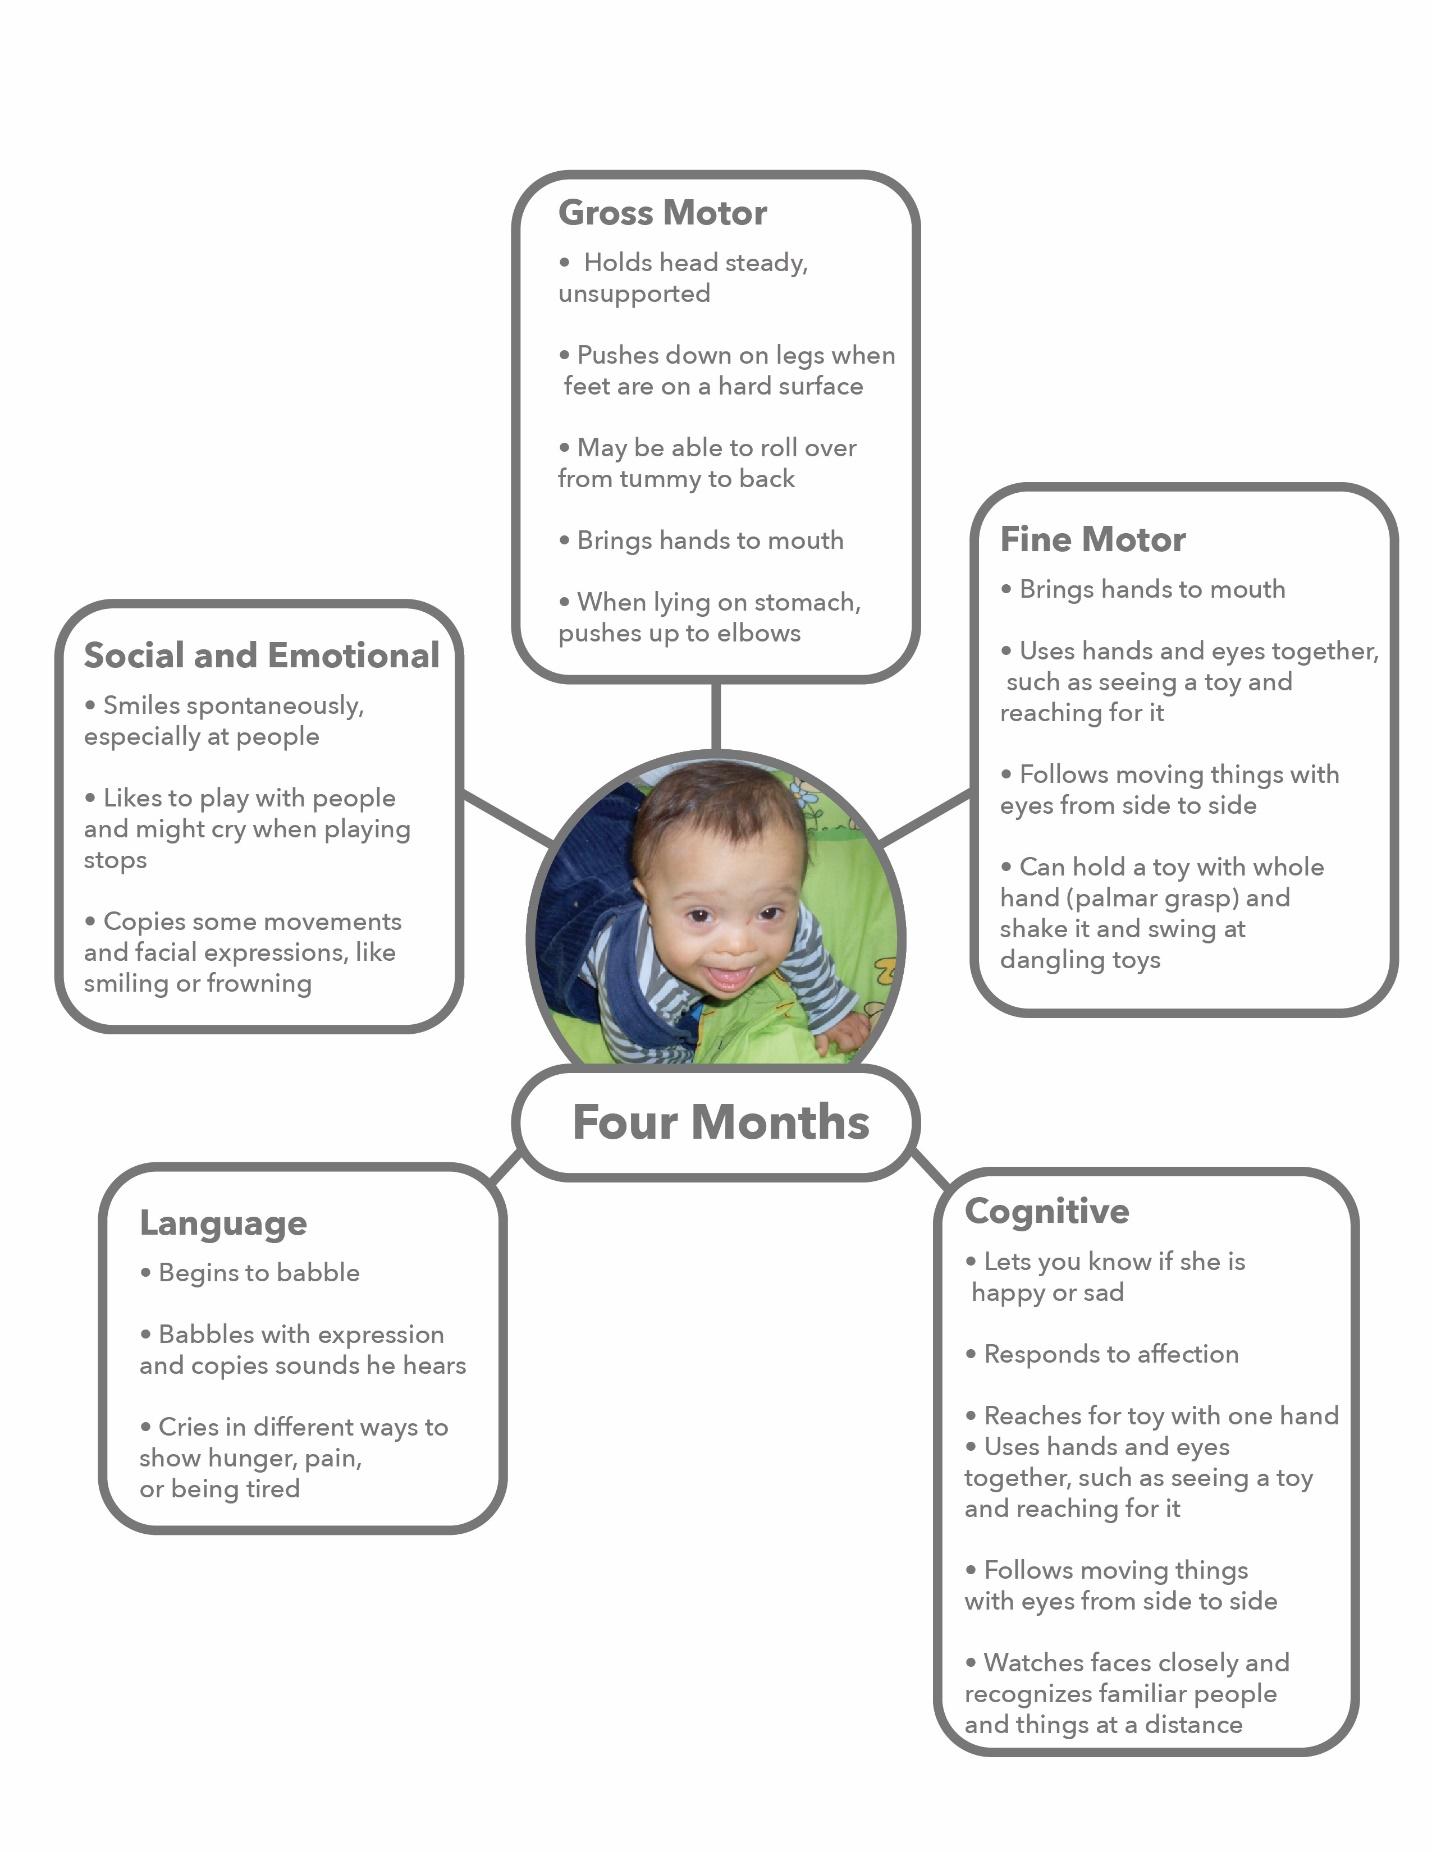 A graphic showing the develomental milestones of a four-month-old